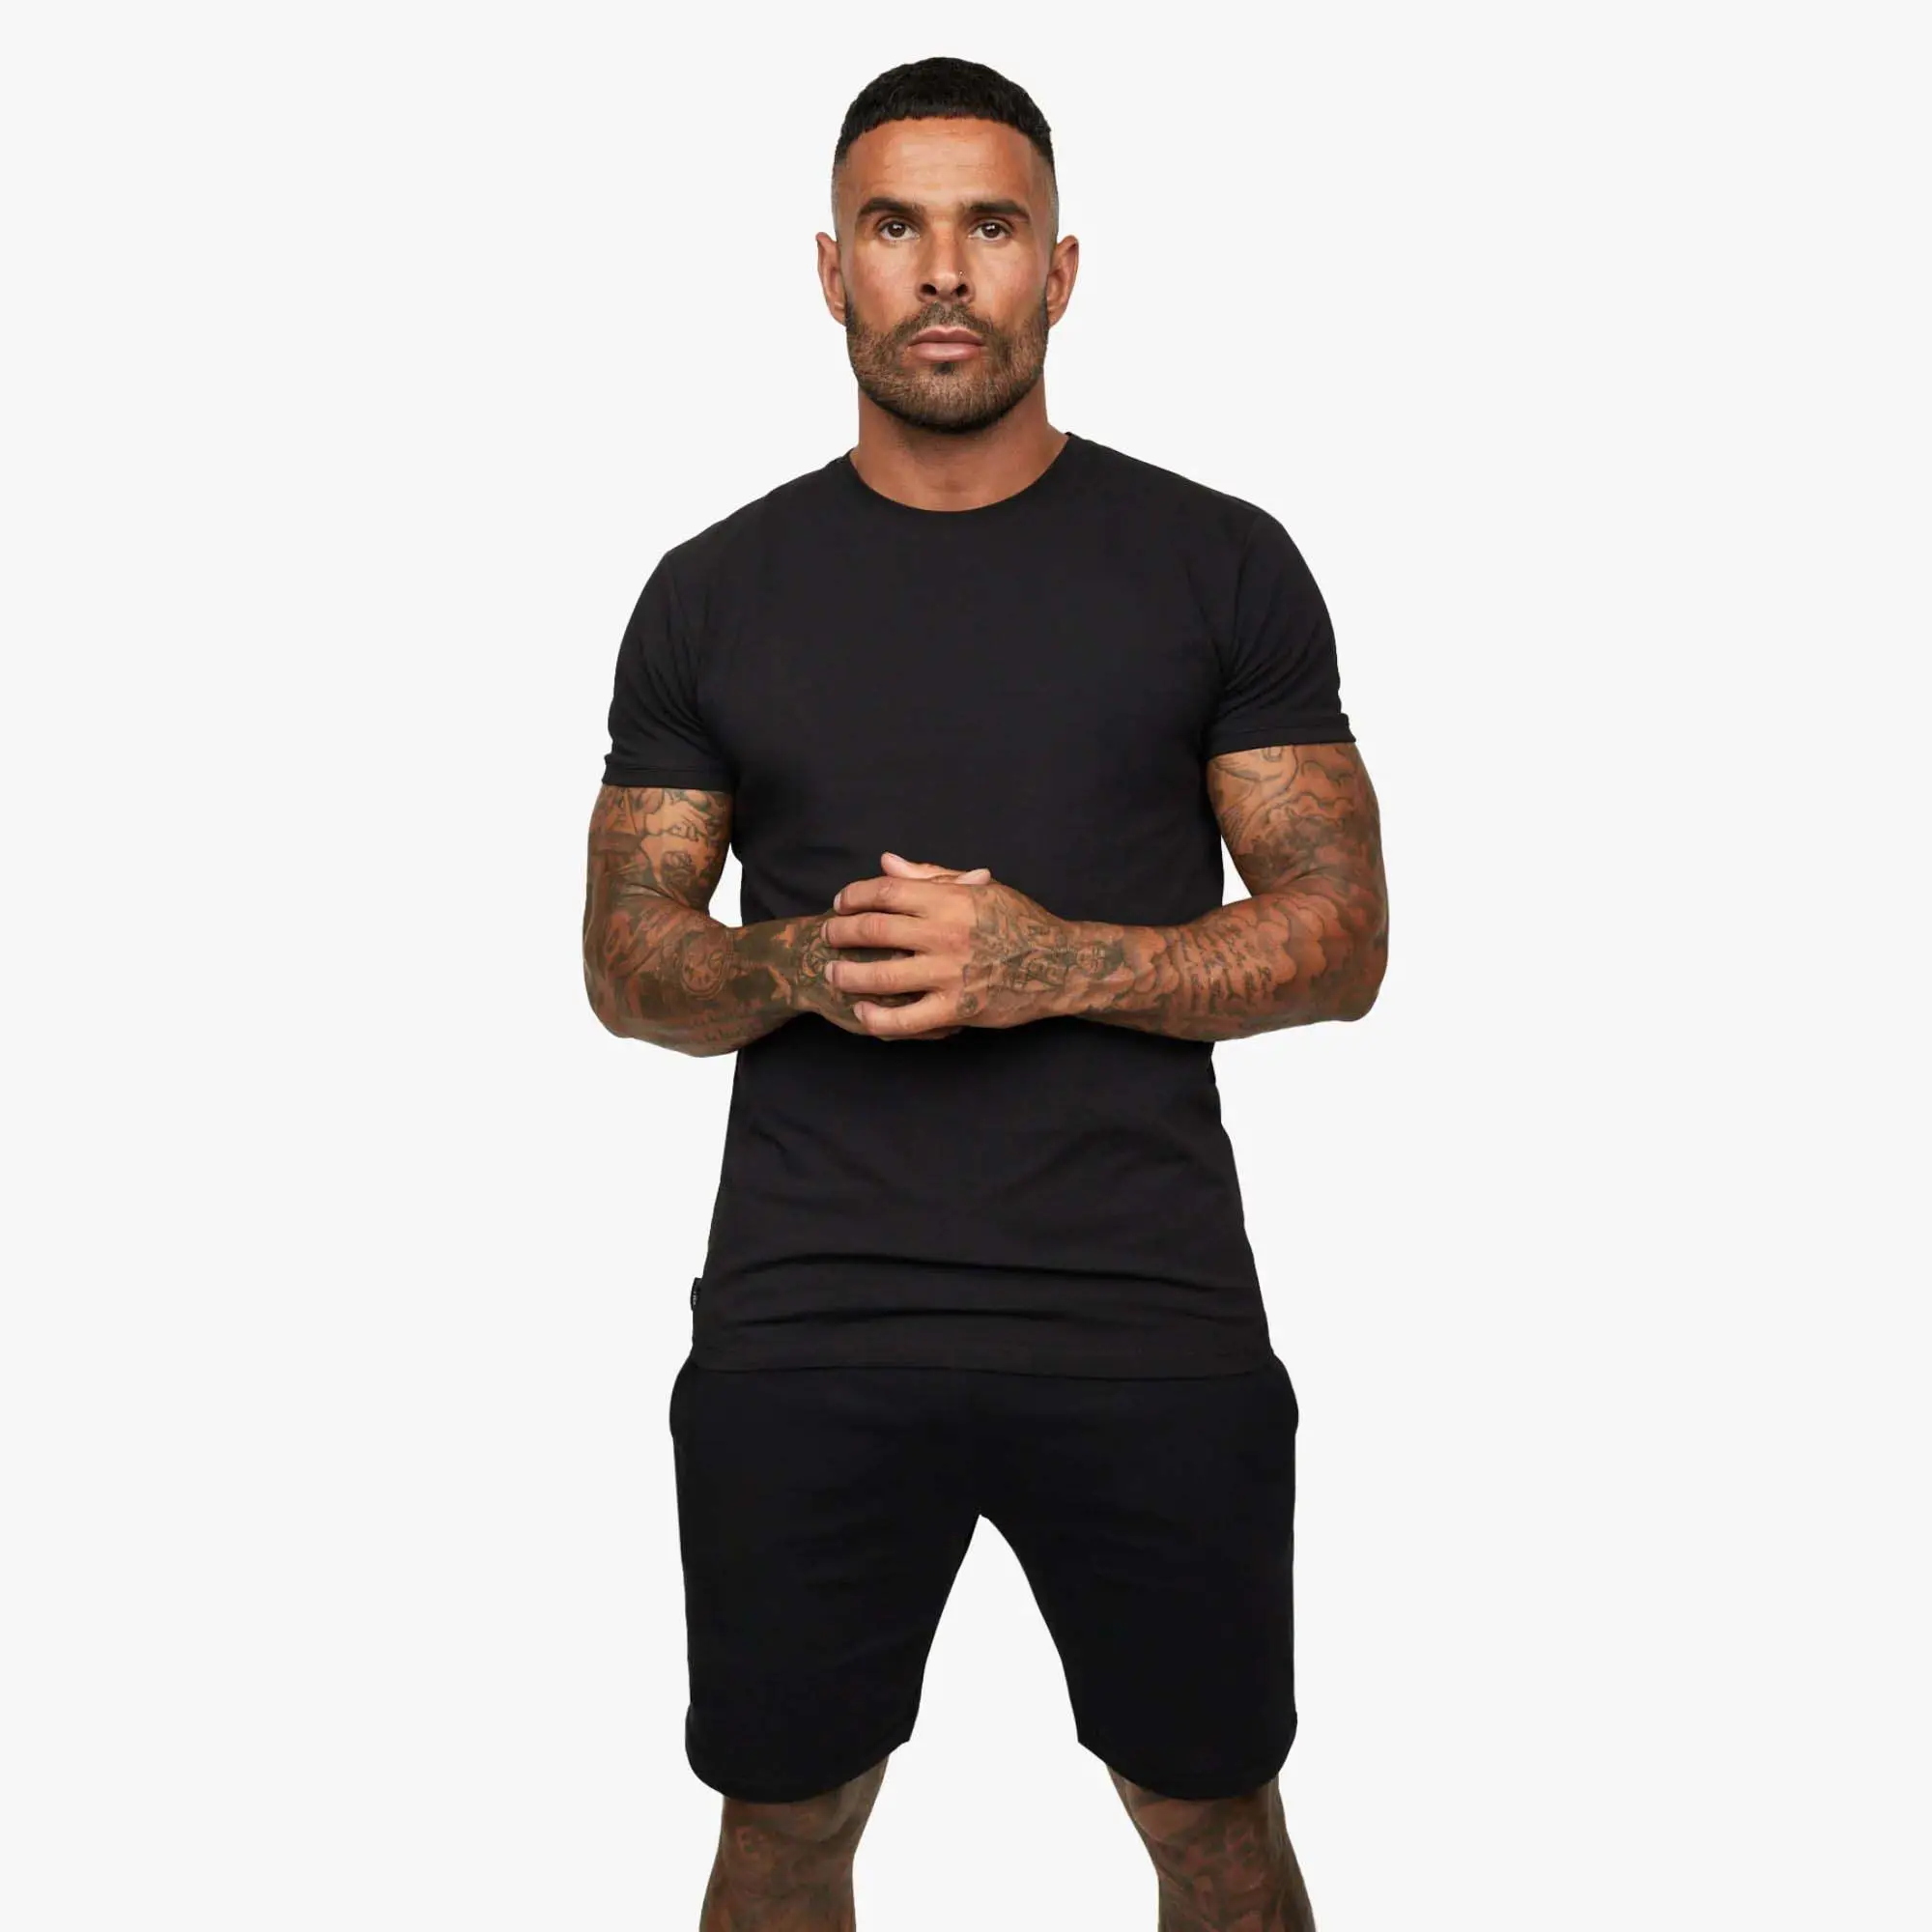 100% Combed Cotton Slim Fit Short Sleeves Crew Neck Fundamental Black Twinset T-Shirts and Shorts Set